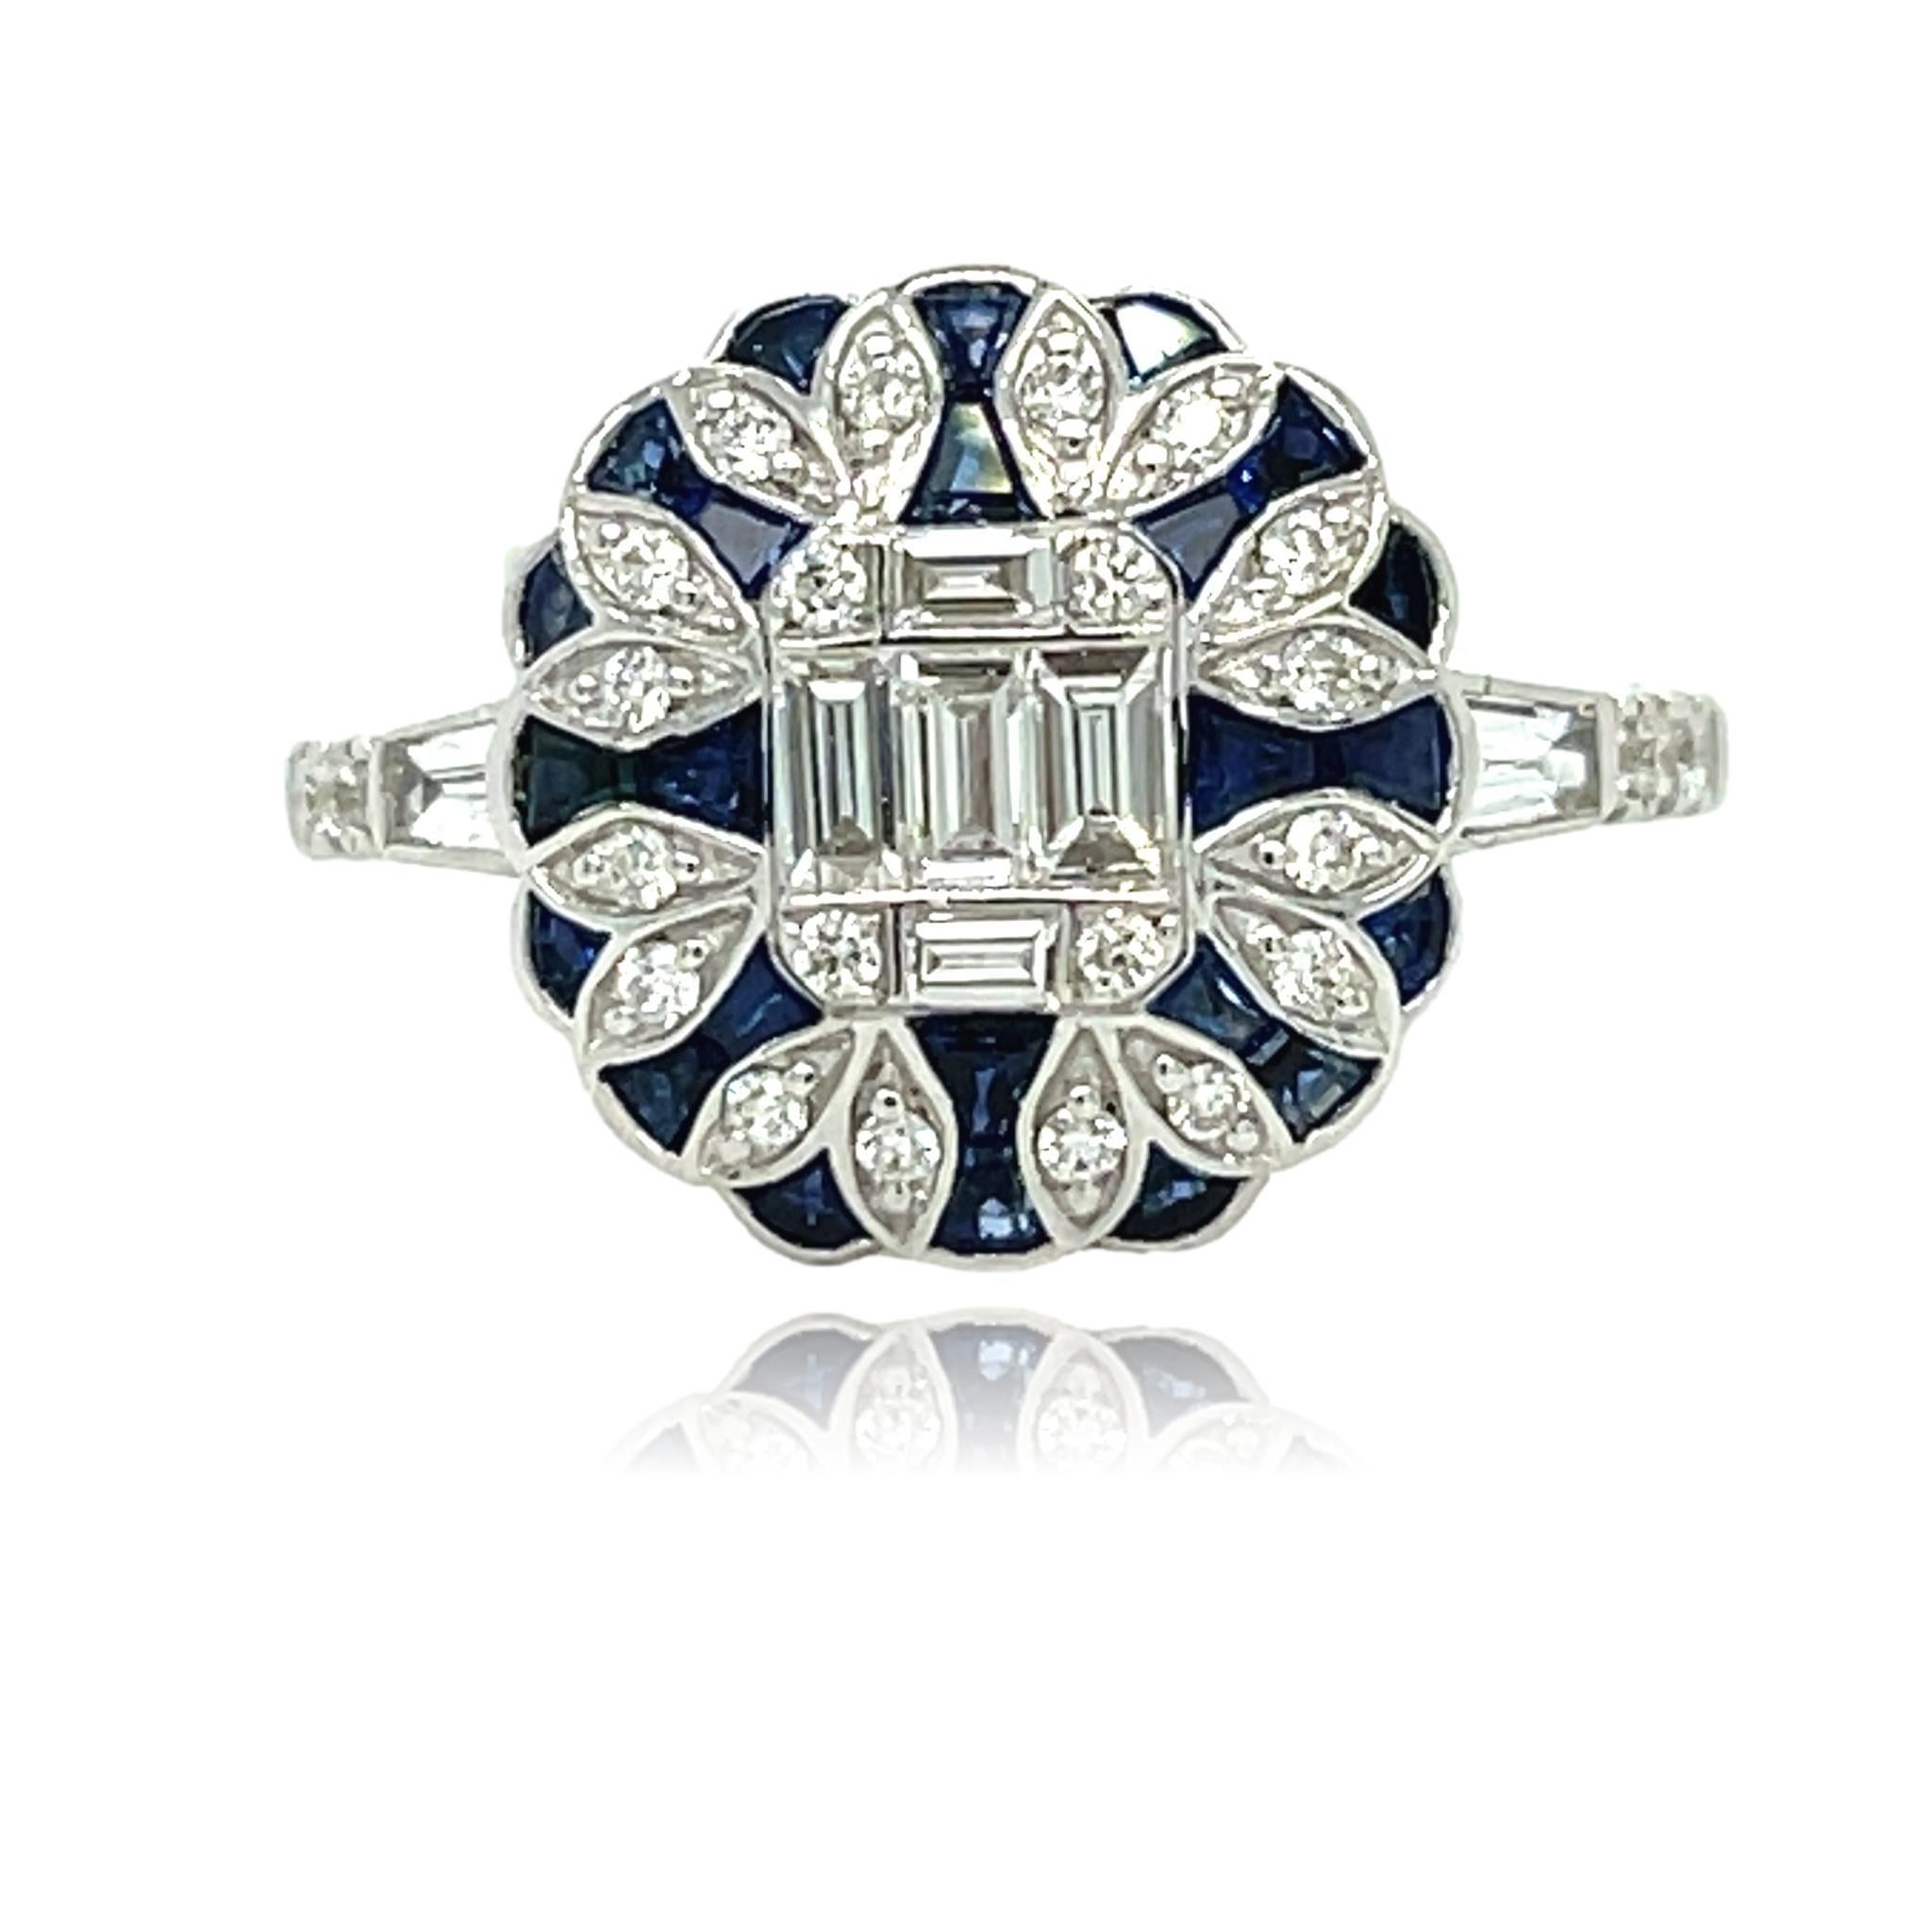 This stunning ring has natural Sapphire and Diamonds set in 18 karat white gold. There are sparkling tapered and round diamonds on the shank for a delicate accent. This ring will be shipped in a beautiful box, ready for the perfect gift! The ring is